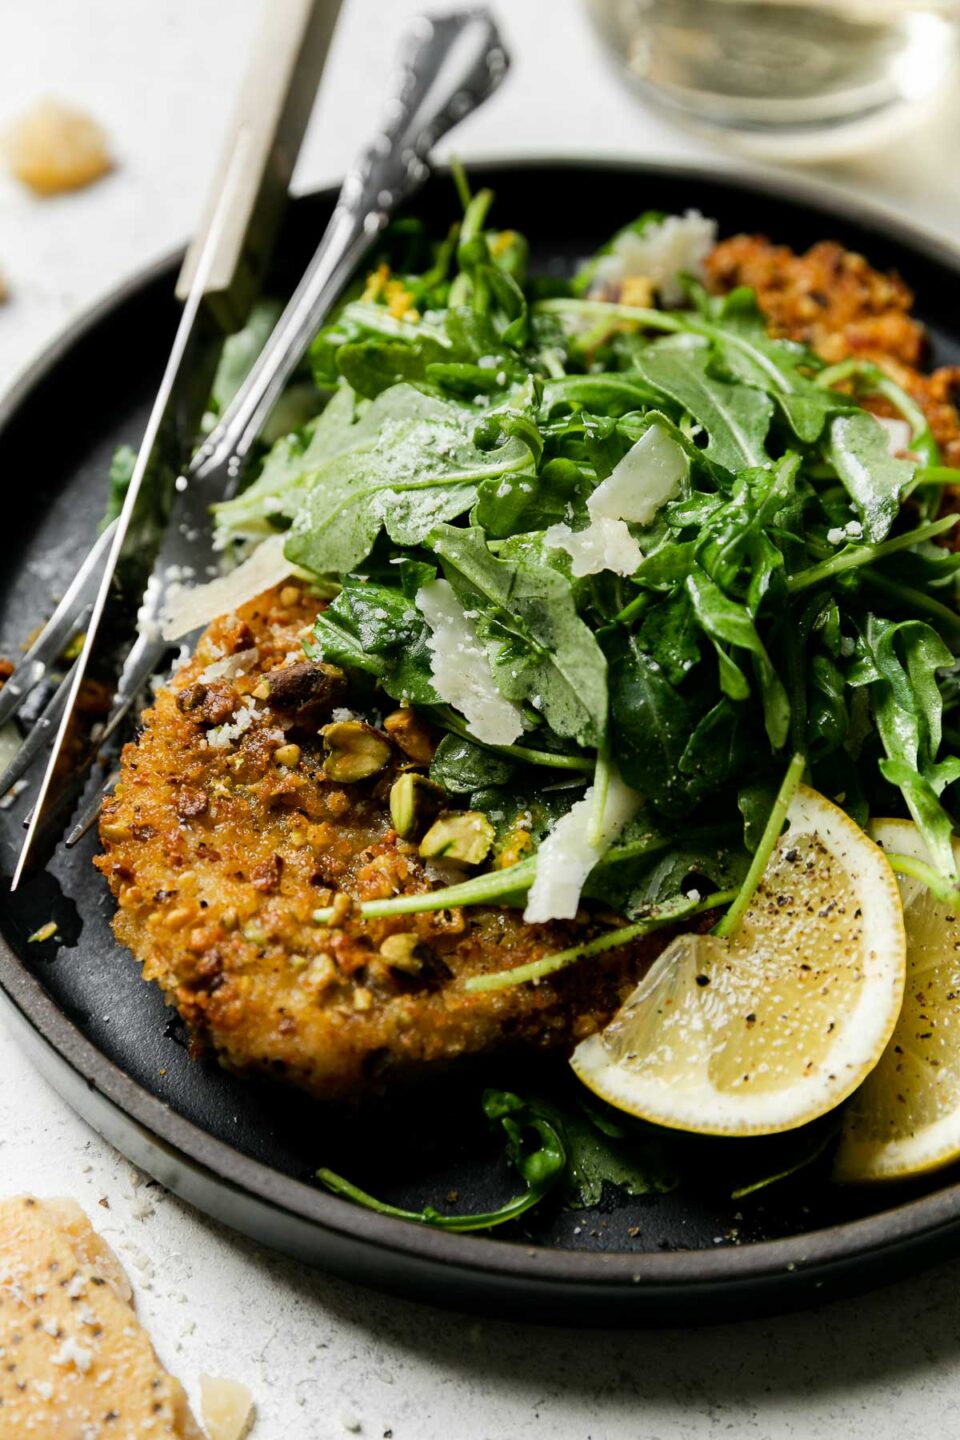 A side angle shot of Parmigiano Reggiano pistachio crusted chicken on a large black dinner plate with a green salad, two lemon wedges, and a silver fork and knife with a wooden handle. The plate has been garnished with black pepper and shaved parmesan. A clear glass filled with white wine and a block of parmesan cheese surround the plate. All items sit atop a creamy white textured surface.